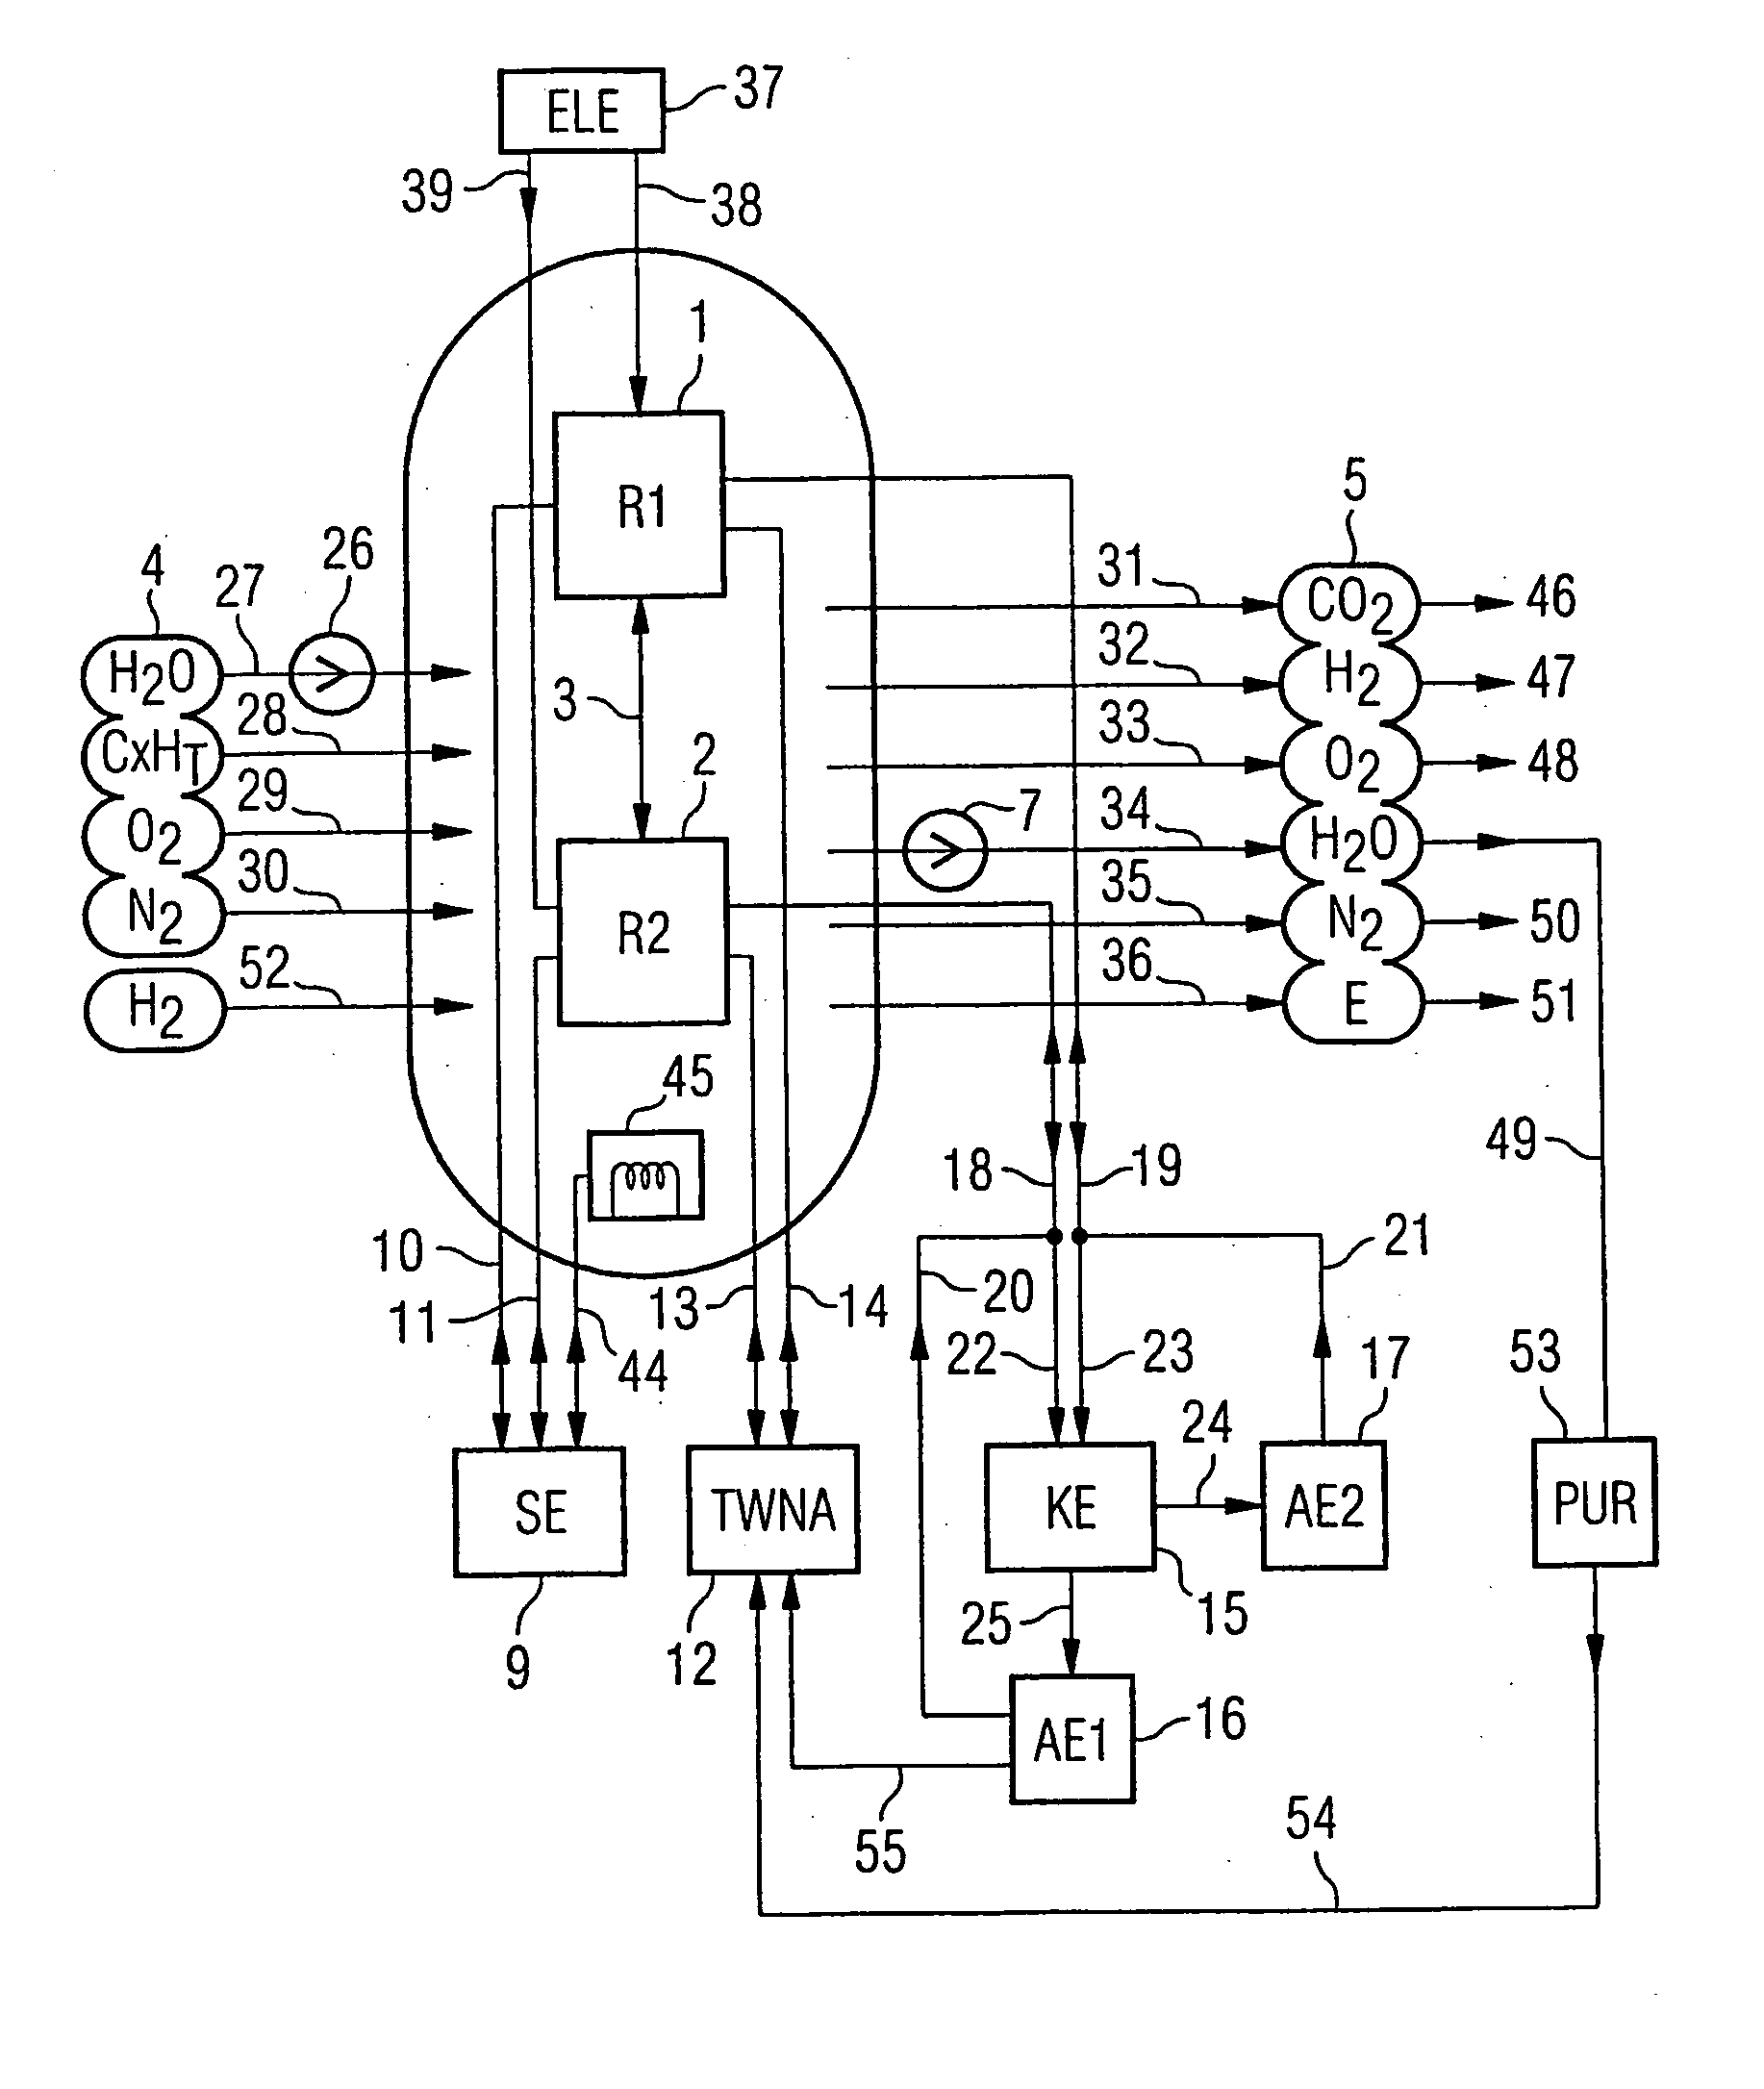 Aircraft having integrated electrochemical supply system